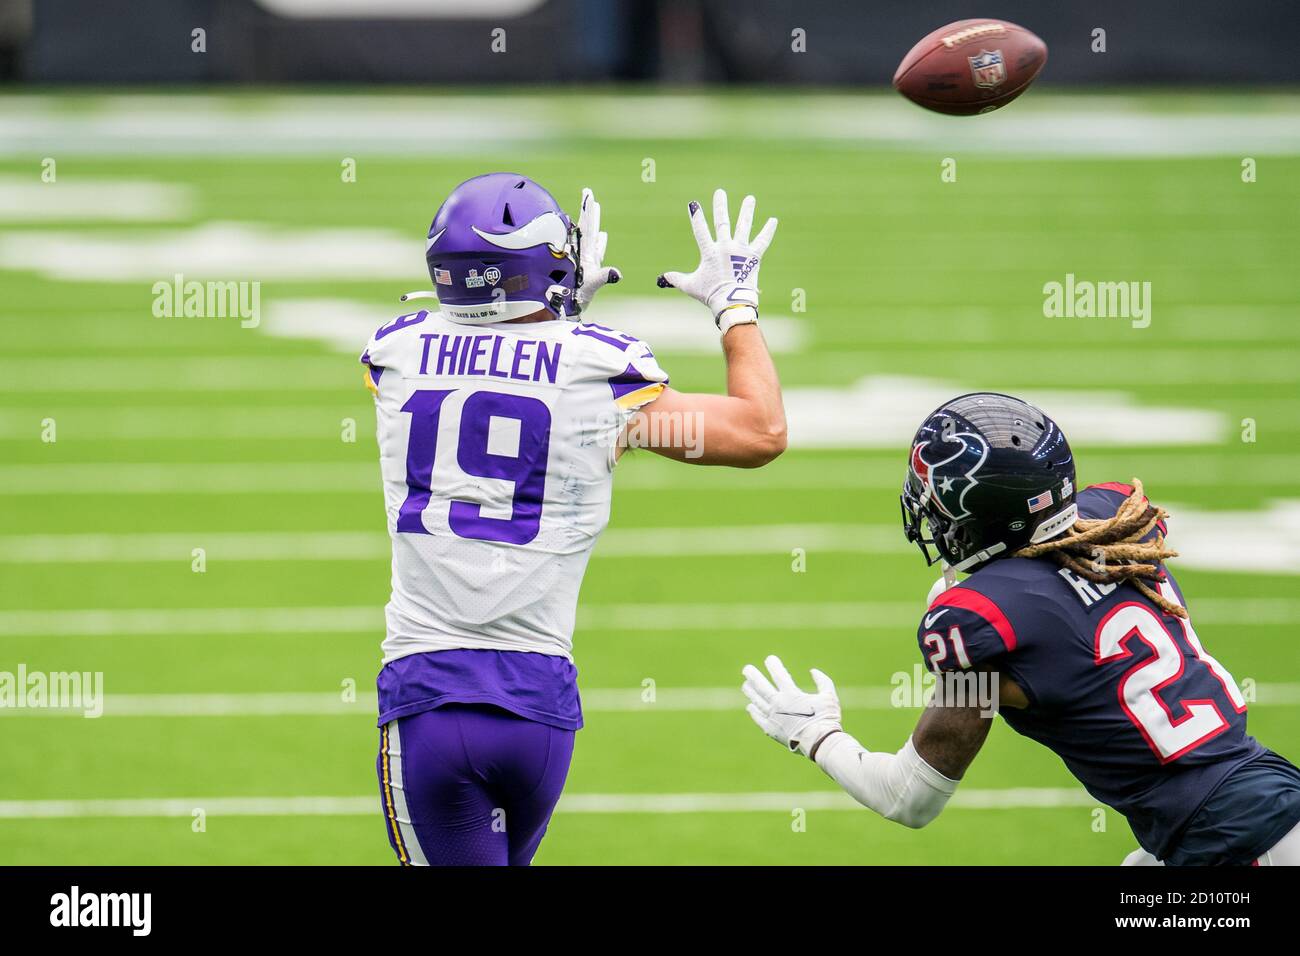 Houston, TX, USA. 4th Oct, 2020. Minnesota Vikings wide receiver Adam Thielen (19) makes a catch while being defended by Houston Texans cornerback Bradley Roby (21) during the 2nd quarter of an NFL football game between the Minnesota Vikings and the Houston Texans at NRG Stadium in Houston, TX. Trask Smith/CSM/Alamy Live News Stock Photo